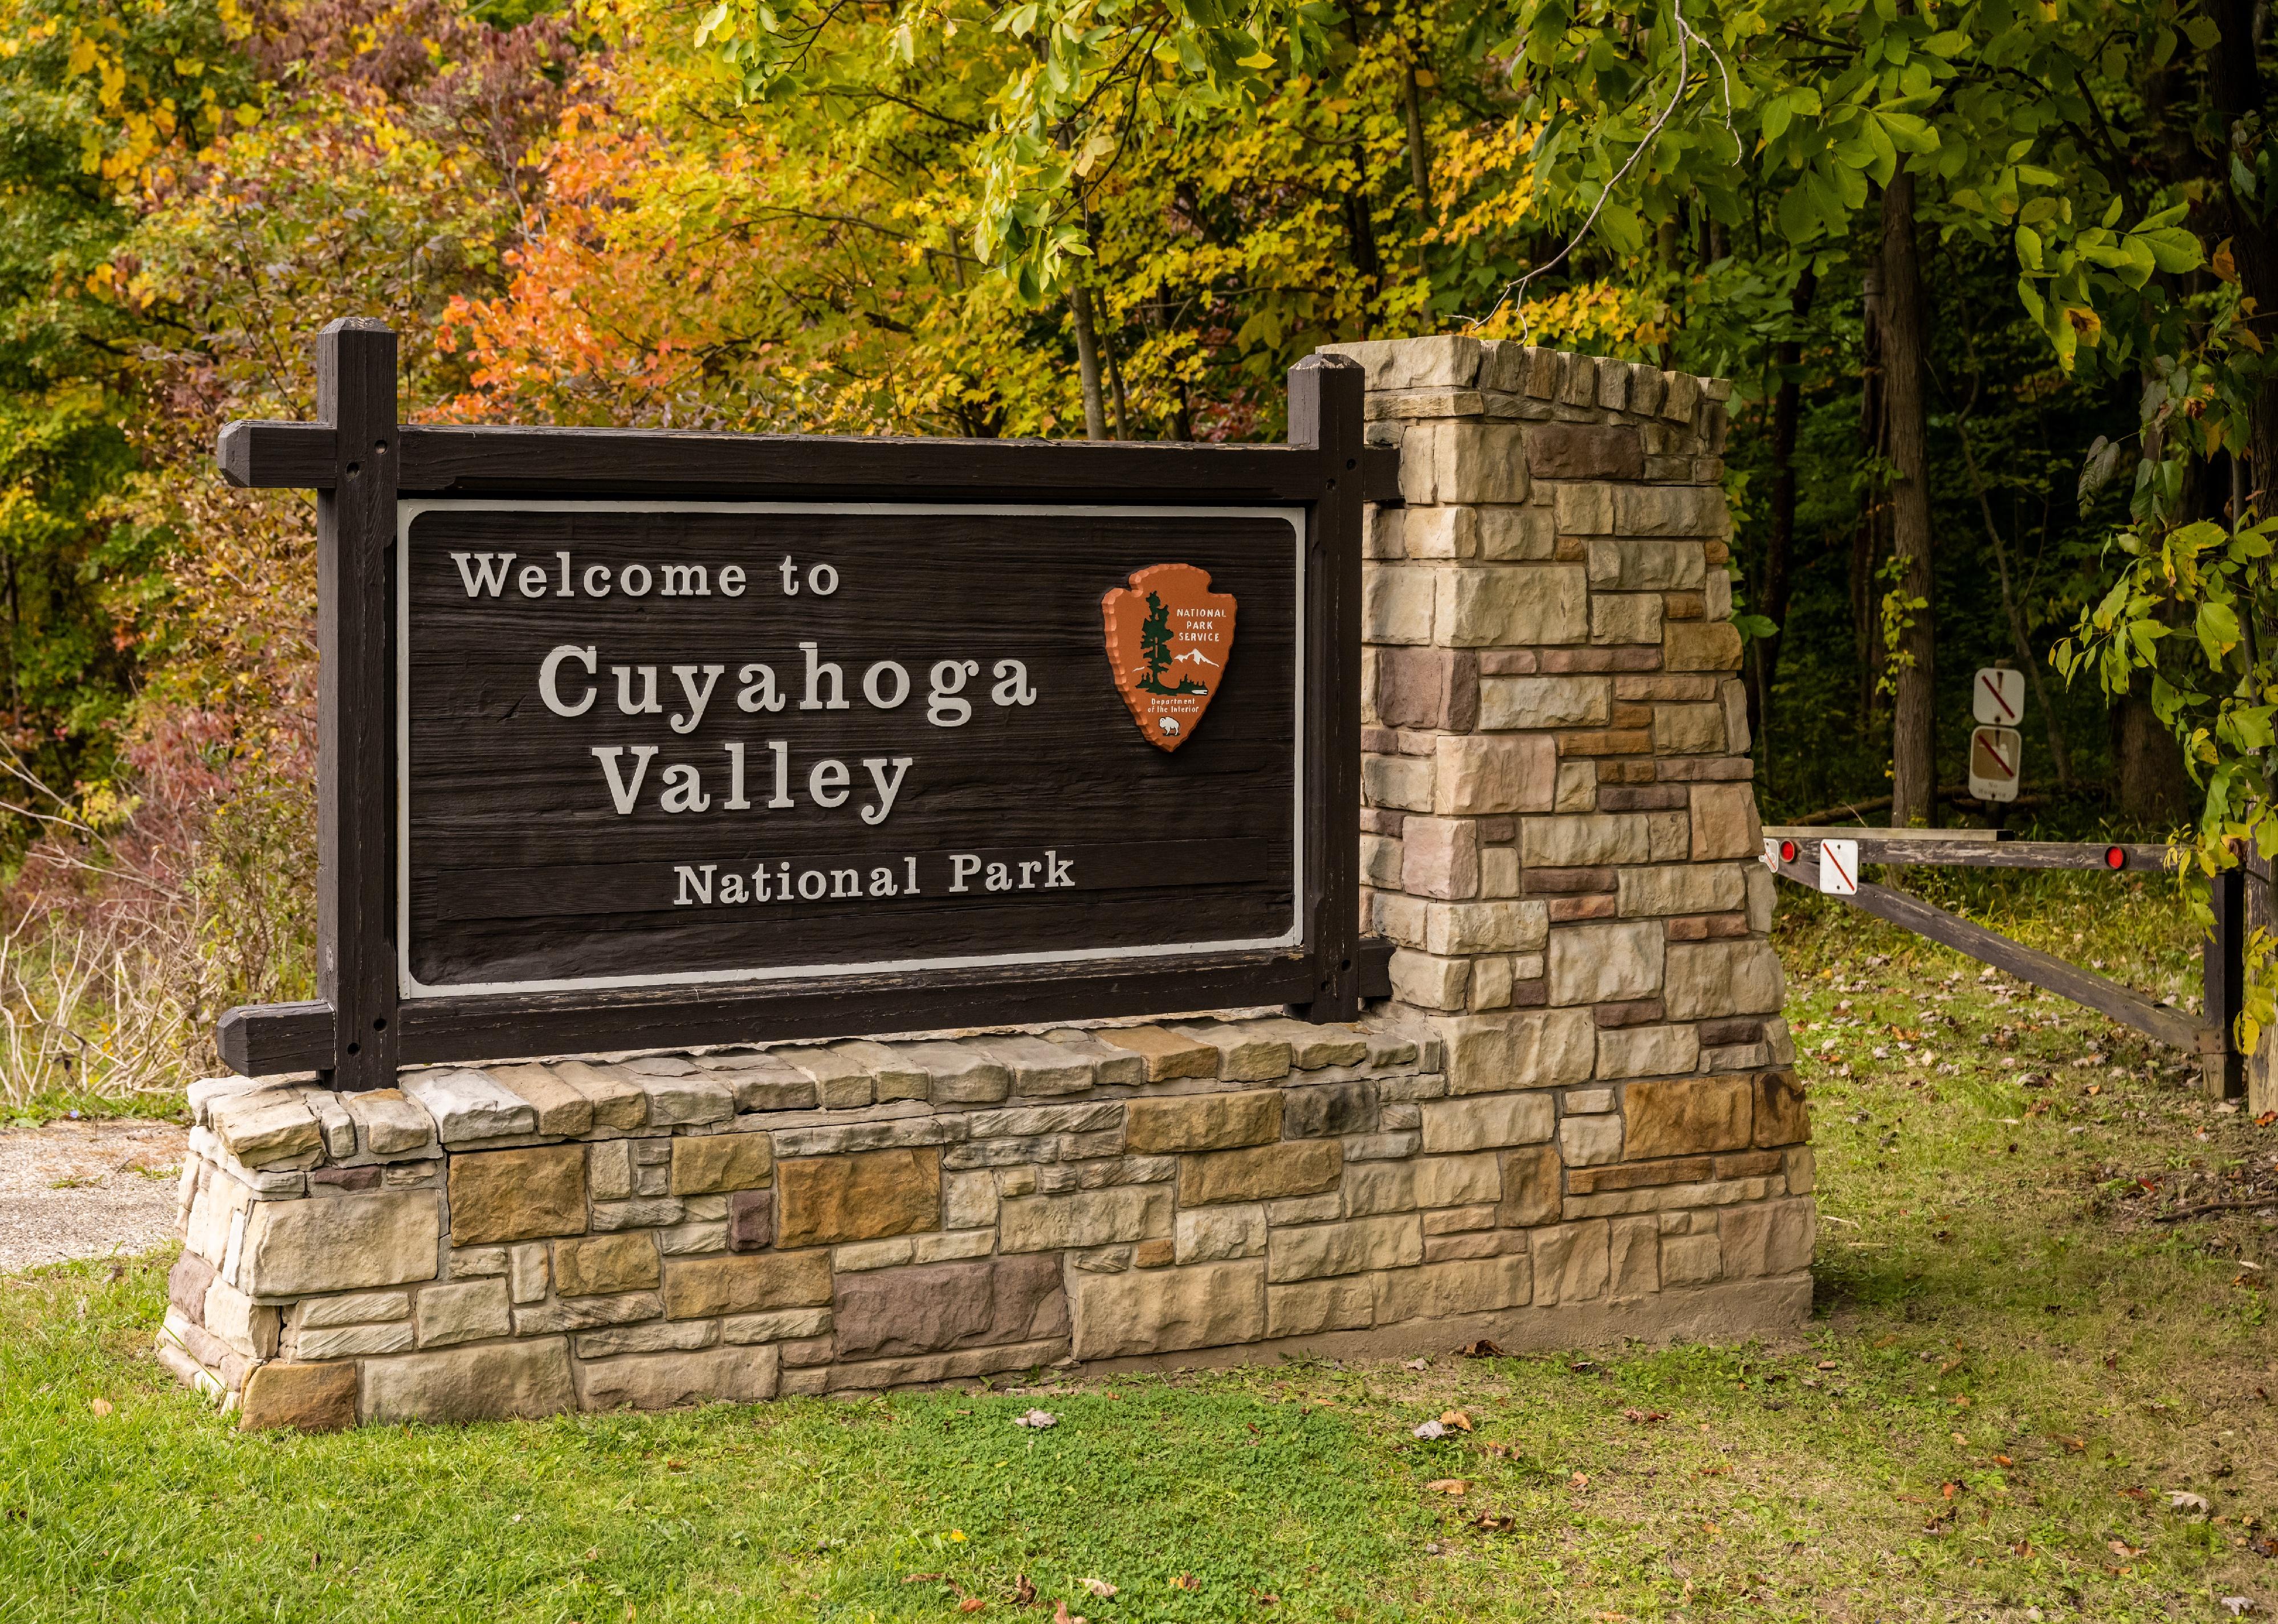 Welcome sign In Cuyahoga Valley National Park.